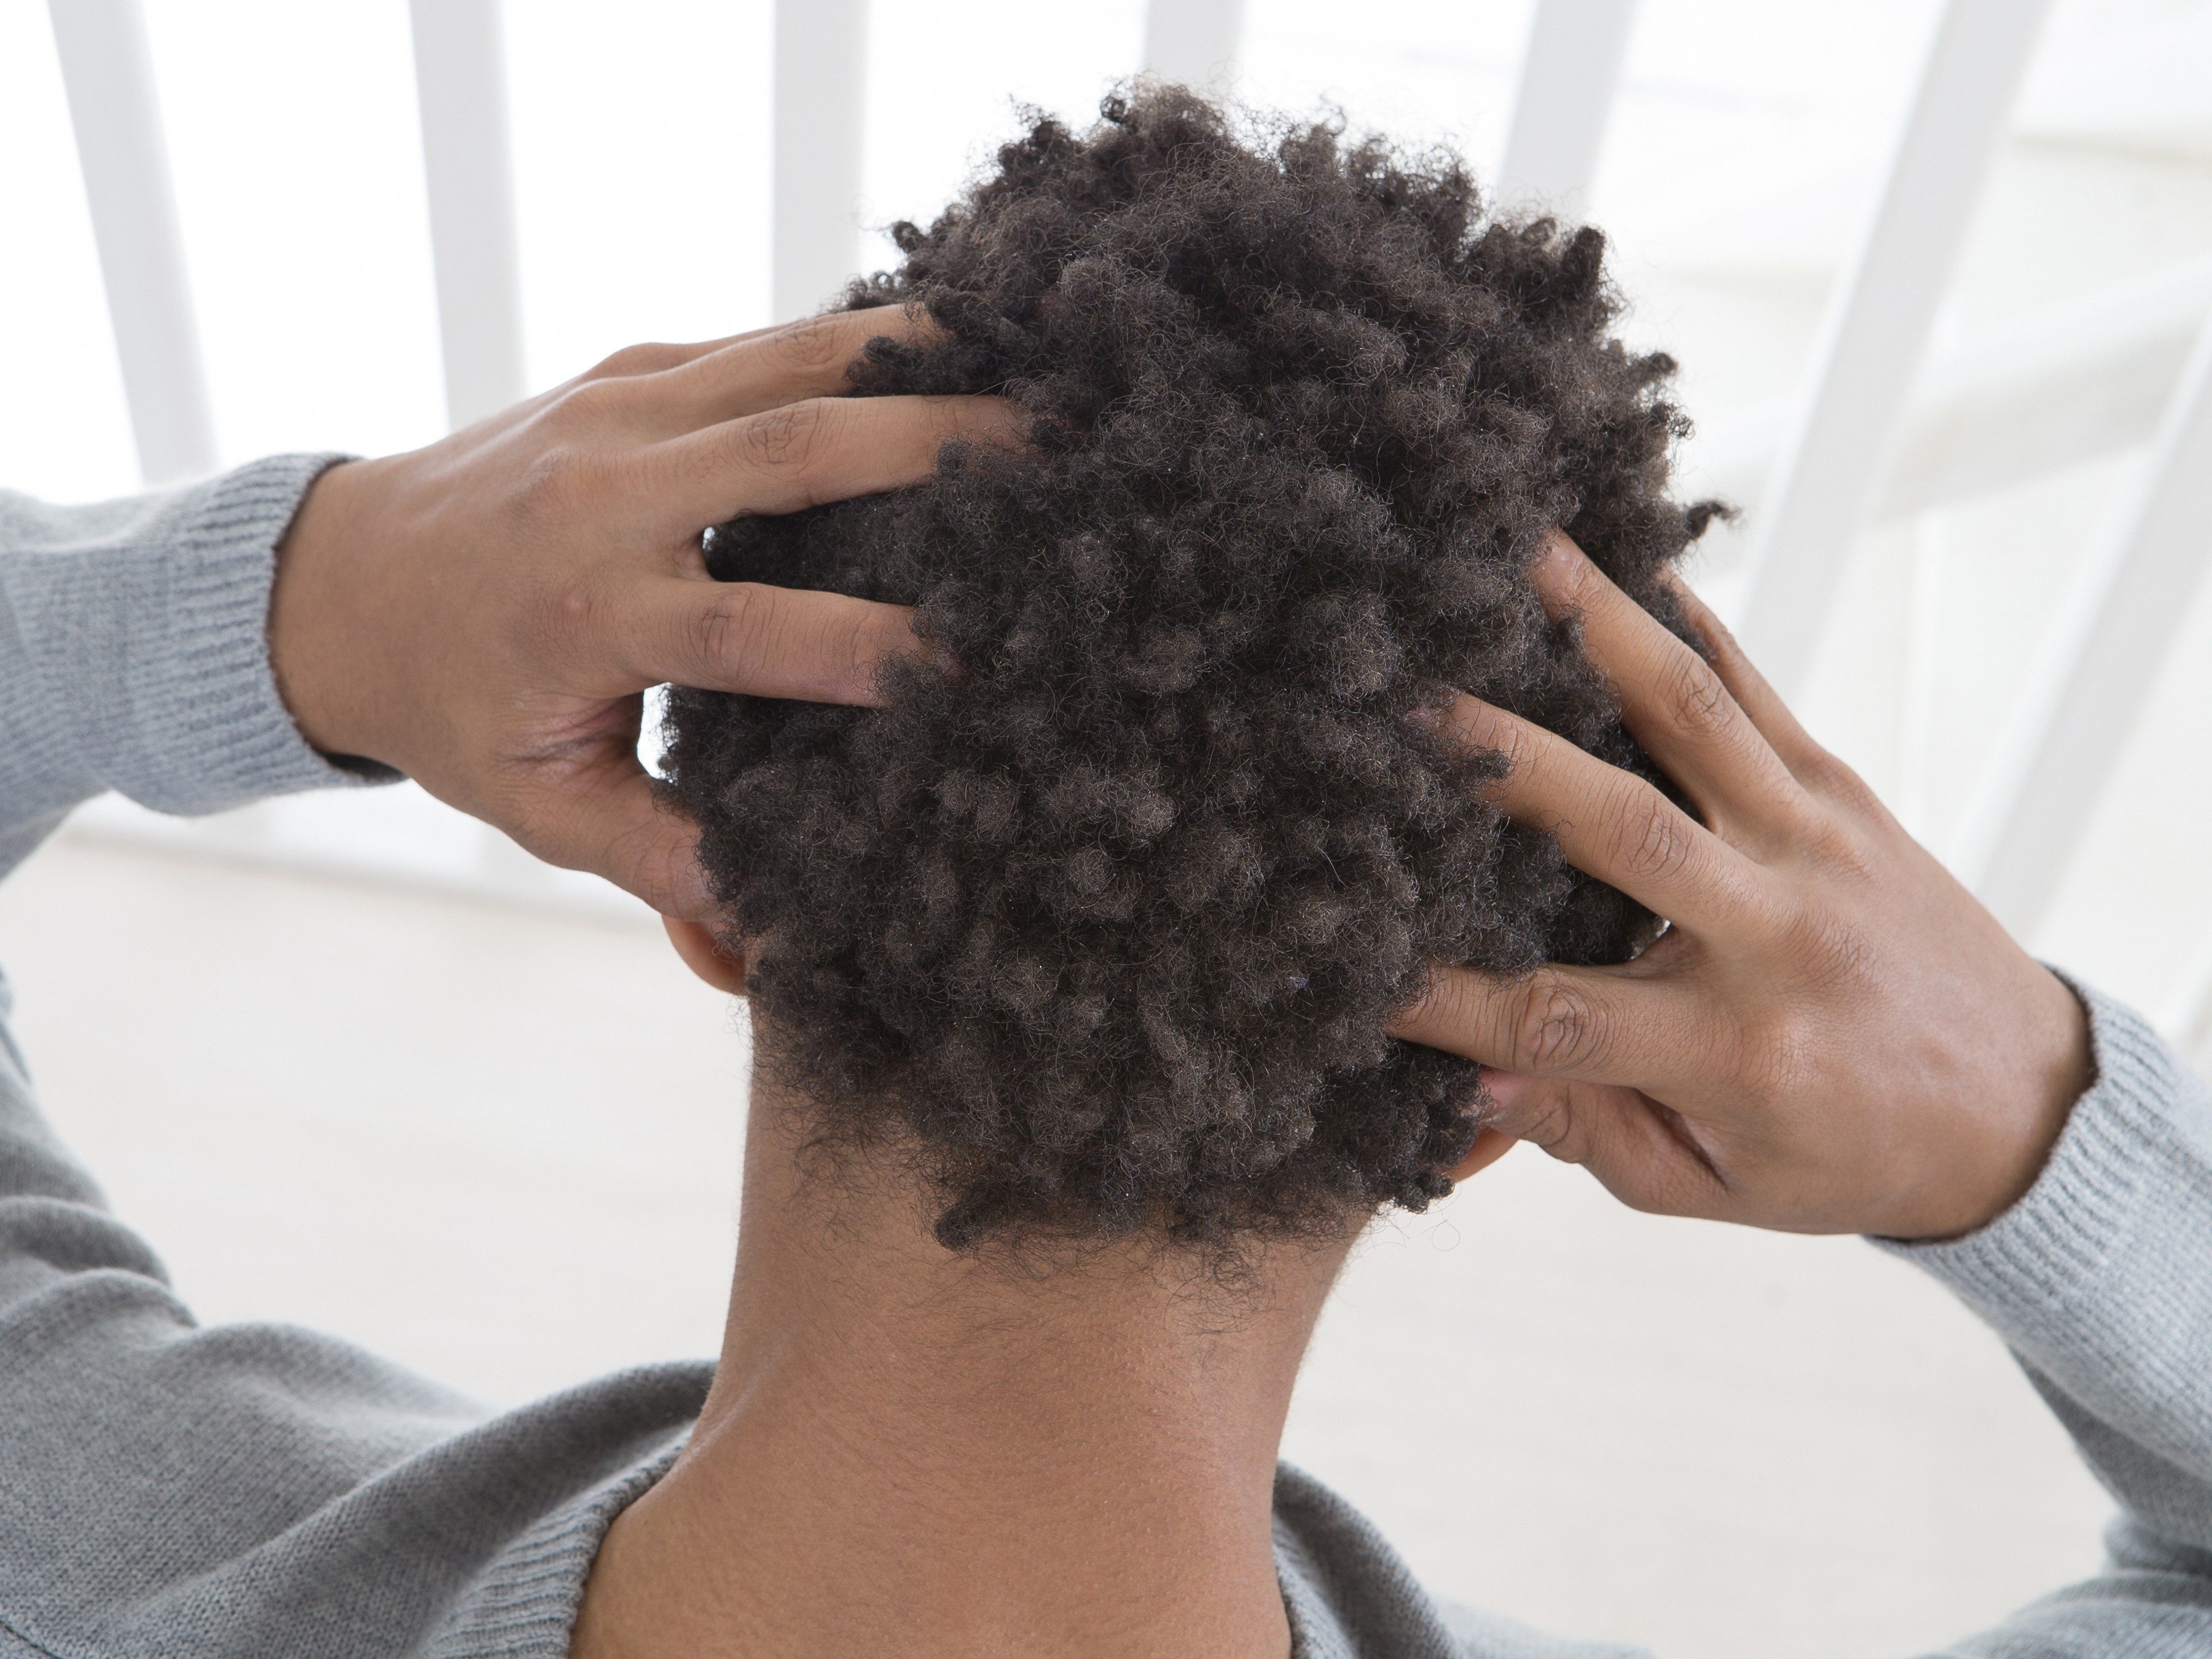 5 Tested Ways To Get Rid Of Dandruff For Good - The Lagos Stylist